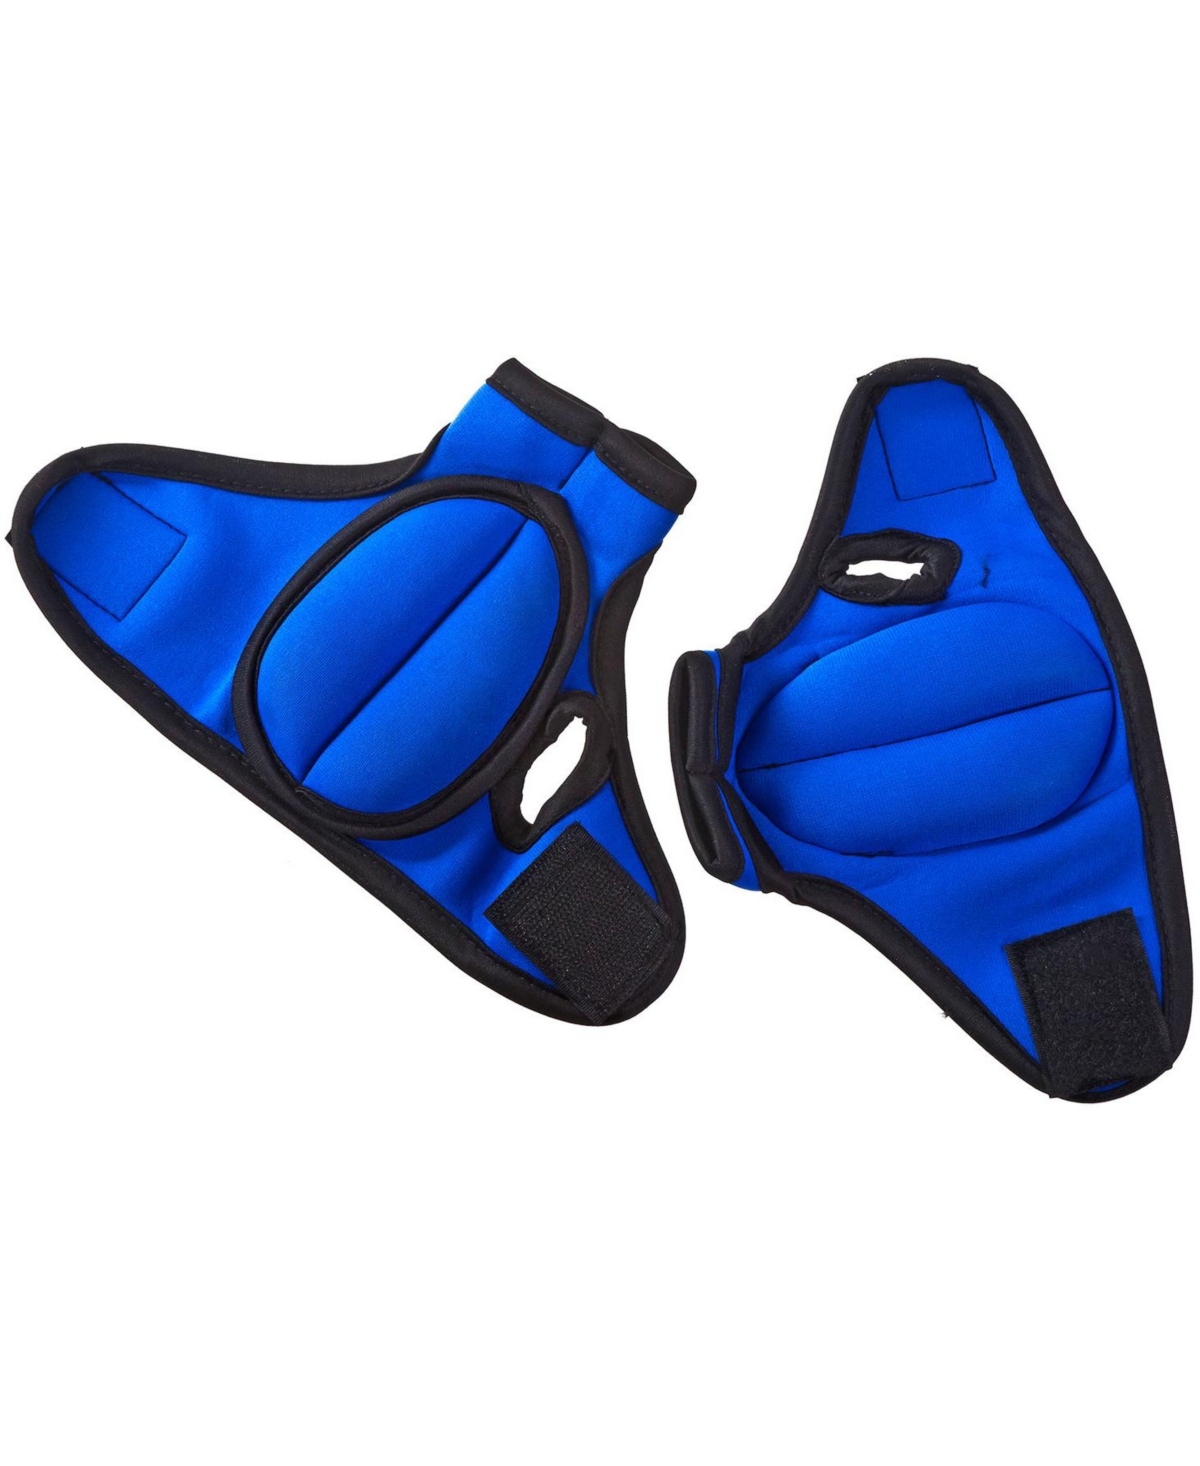 Weighted Sculpting Gloves - Blue